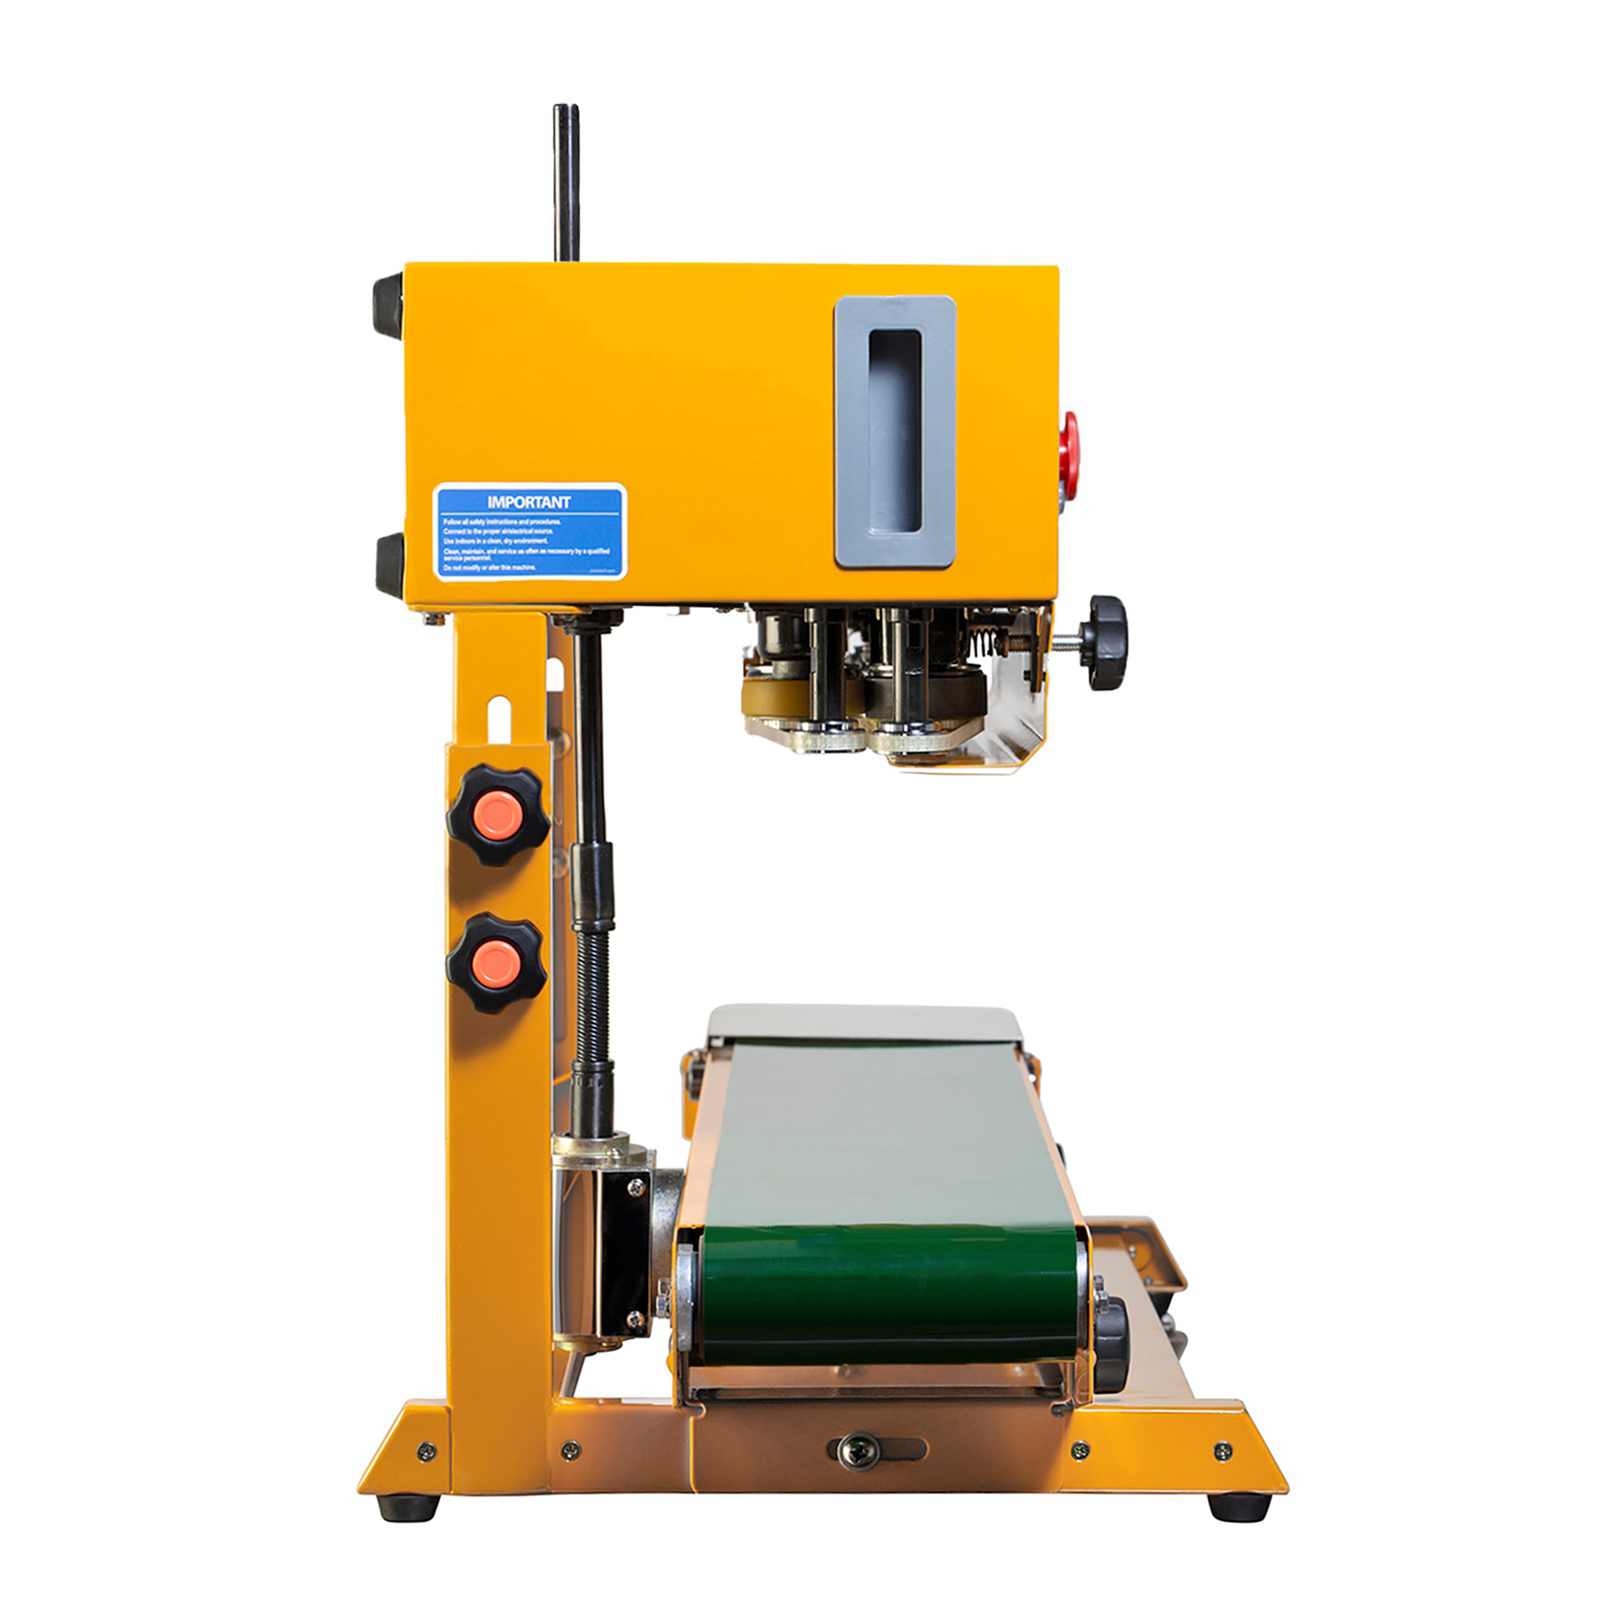 side view of the JORES TECHNOLOGIES® continuous band sealer with green conveyor belt and stainless steel base. Detail shows the exit track  and 2 knobs to adjust the height of the product being sealed